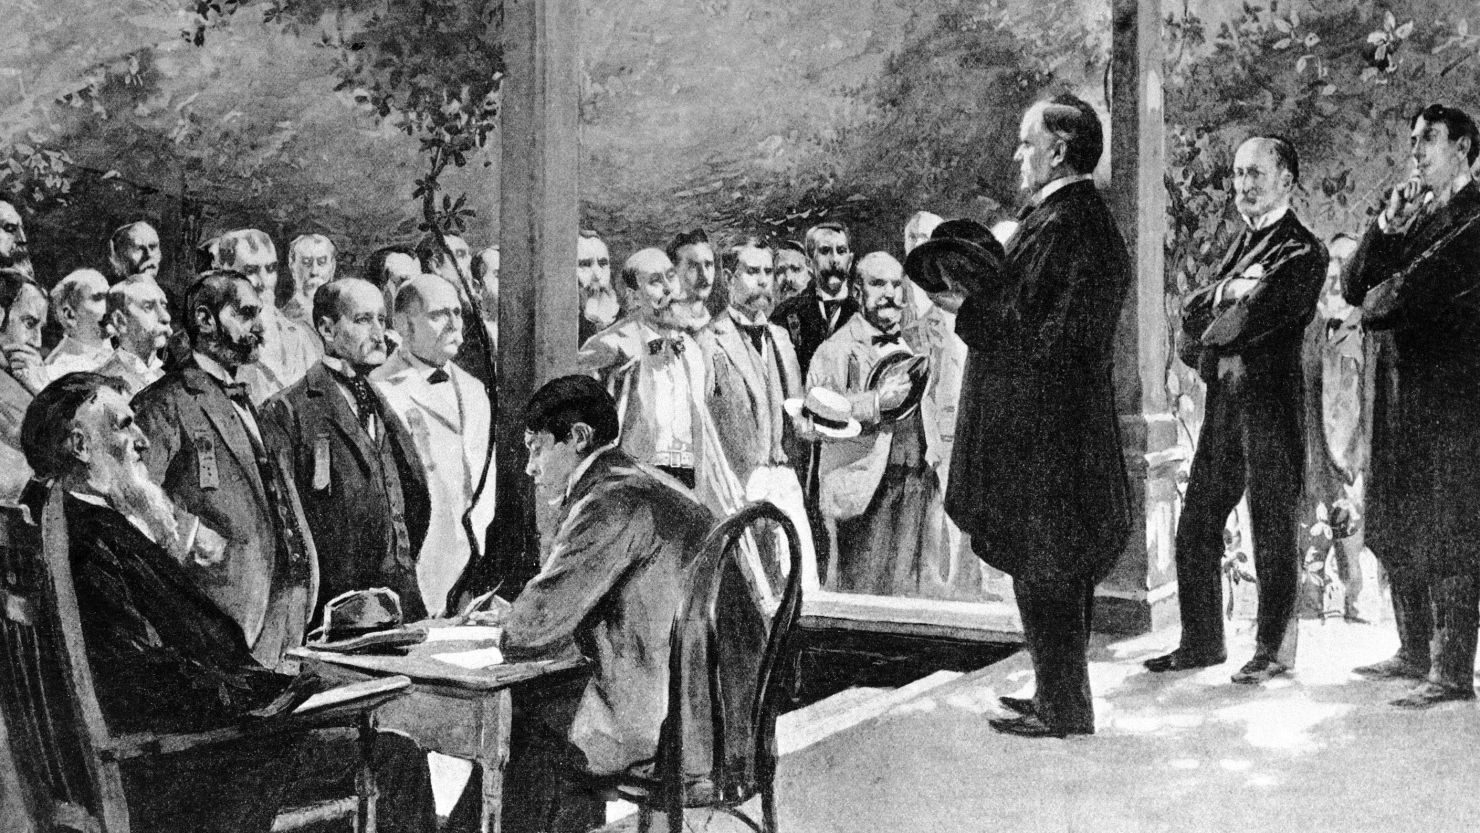 Instead of campaigning on the road, which was seen as undignified, 19th century candidates gave speeches from their own homes. Major William McKinley, the presidential nominee for the Republican Party, gave a front-porch campaign speech at his home in Canton, Ohio in 1896.